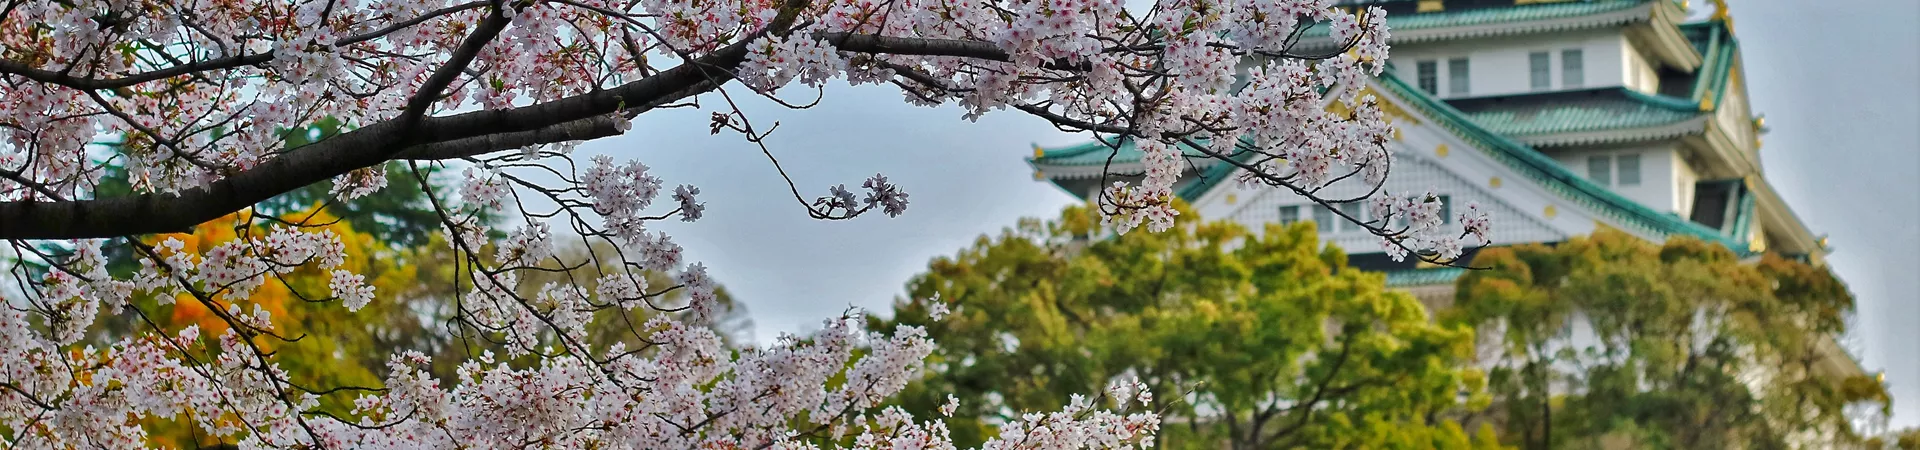 A close-up photo of cherry tree and japan-style building